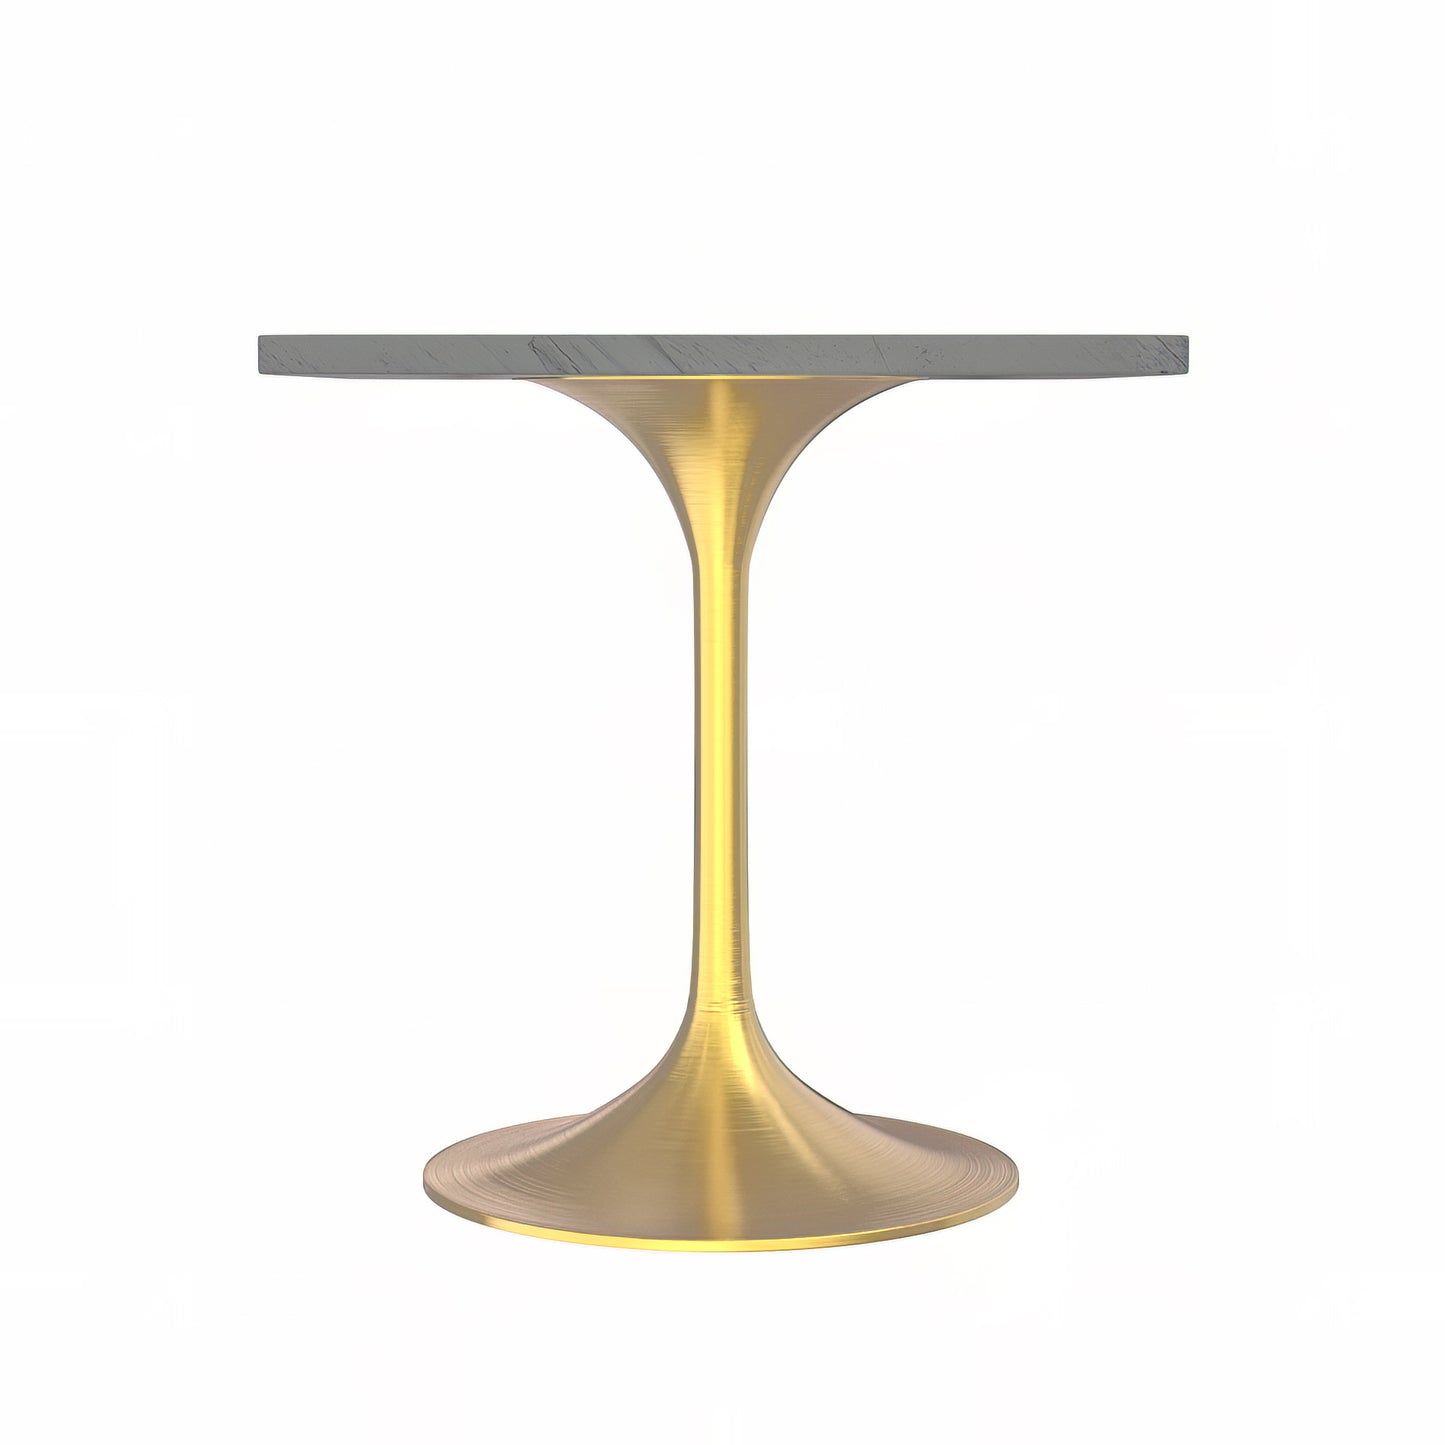 Vera 27" Square Dining Table - Gold Base Marbleized Top